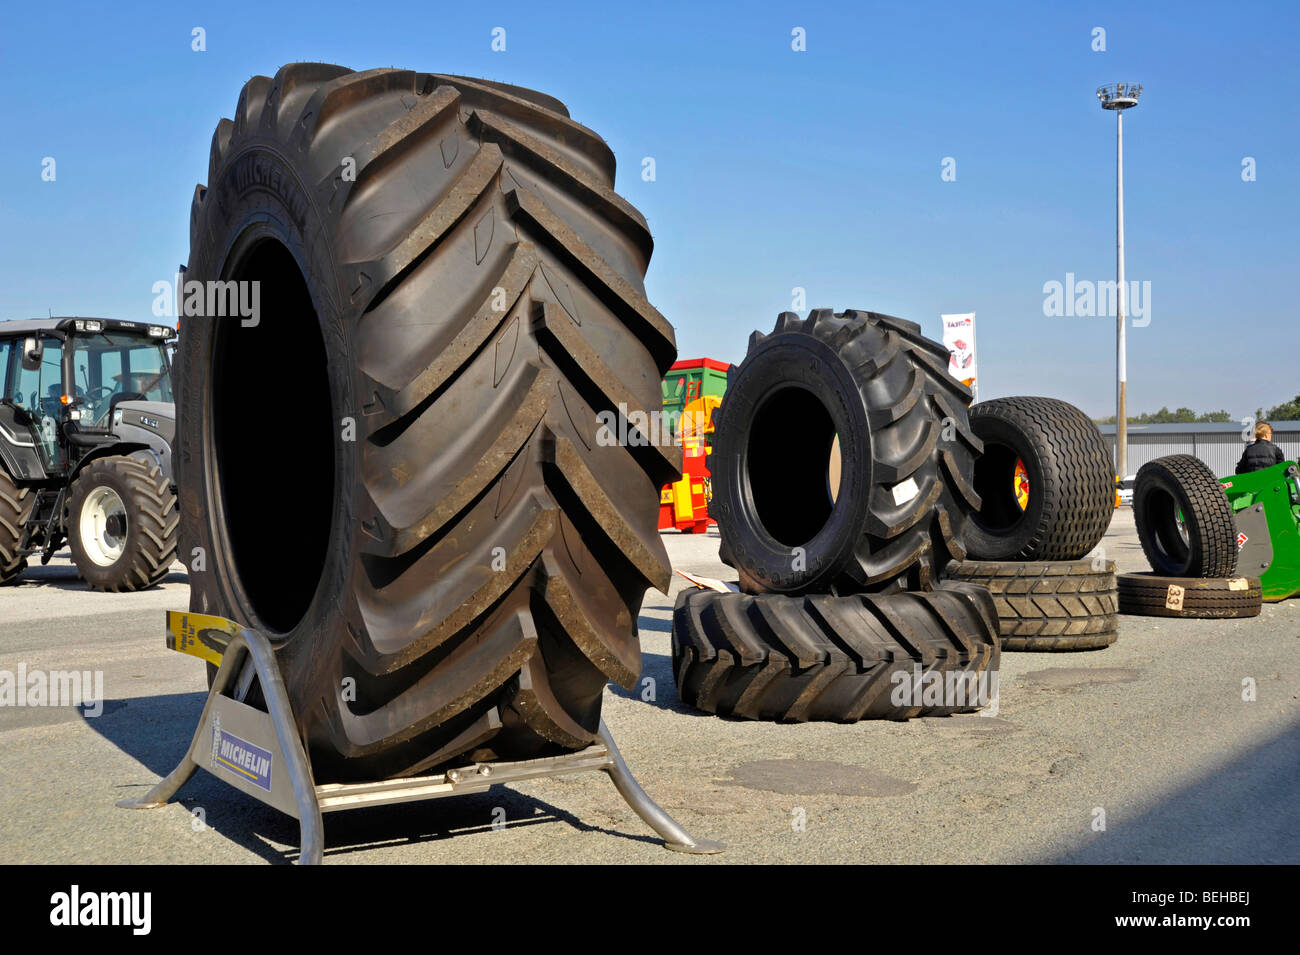 Tractor tyres on display at agriculture show. Stock Photo